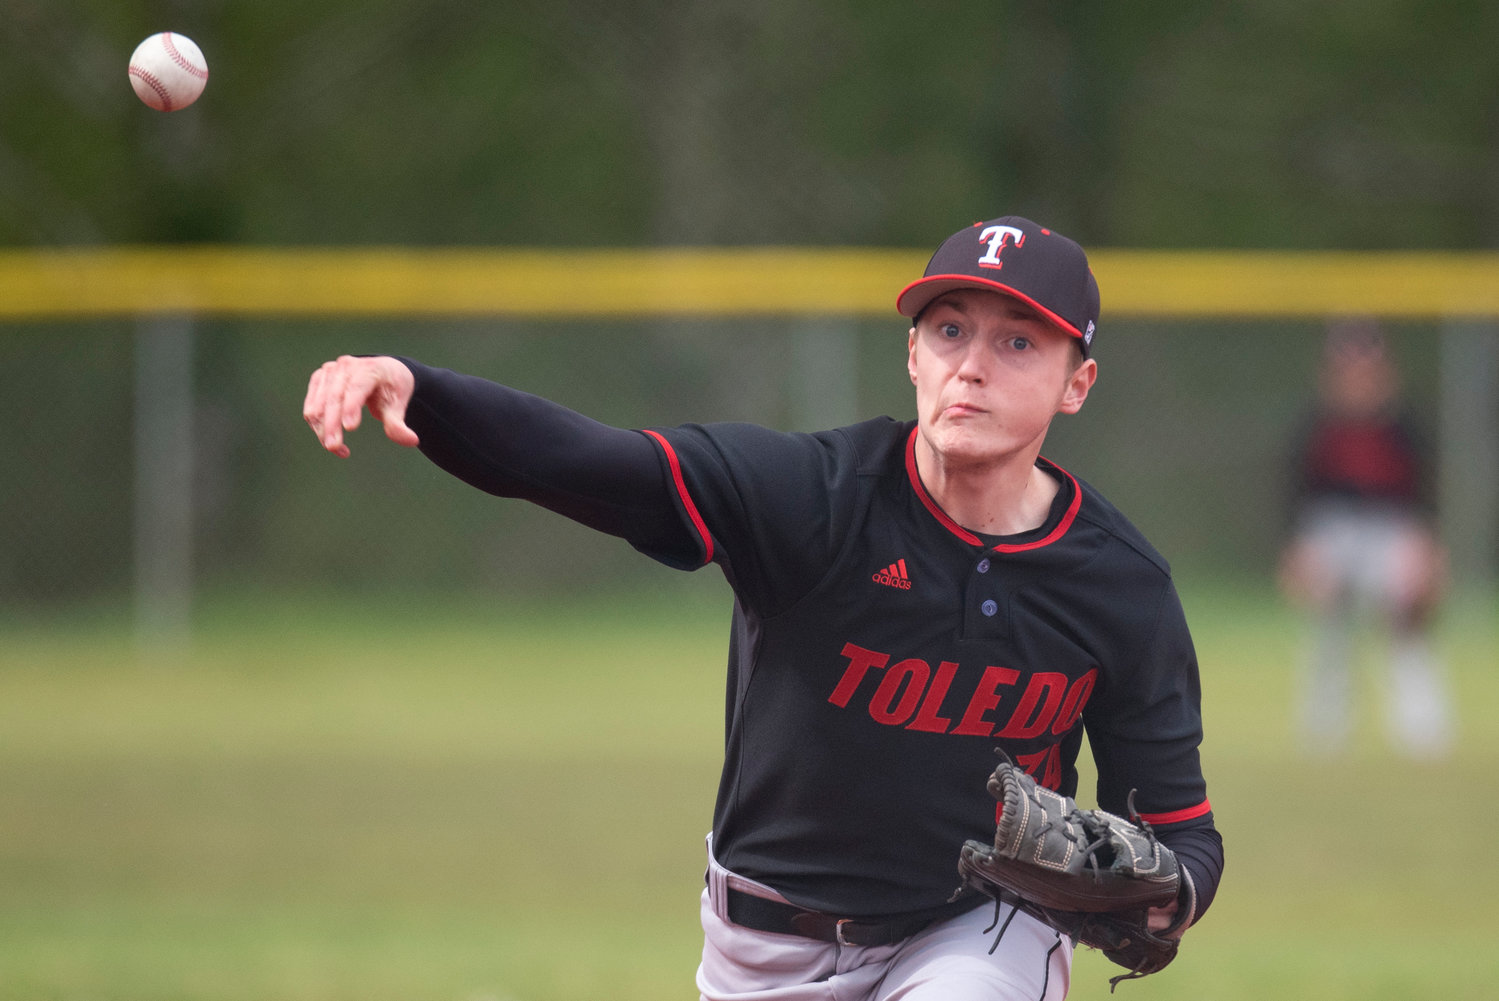 Toledo's Caiden Schultz delivers a pitch to a Wahkiakum batter during a district playoff game in South Bend on Saturday, May 7.